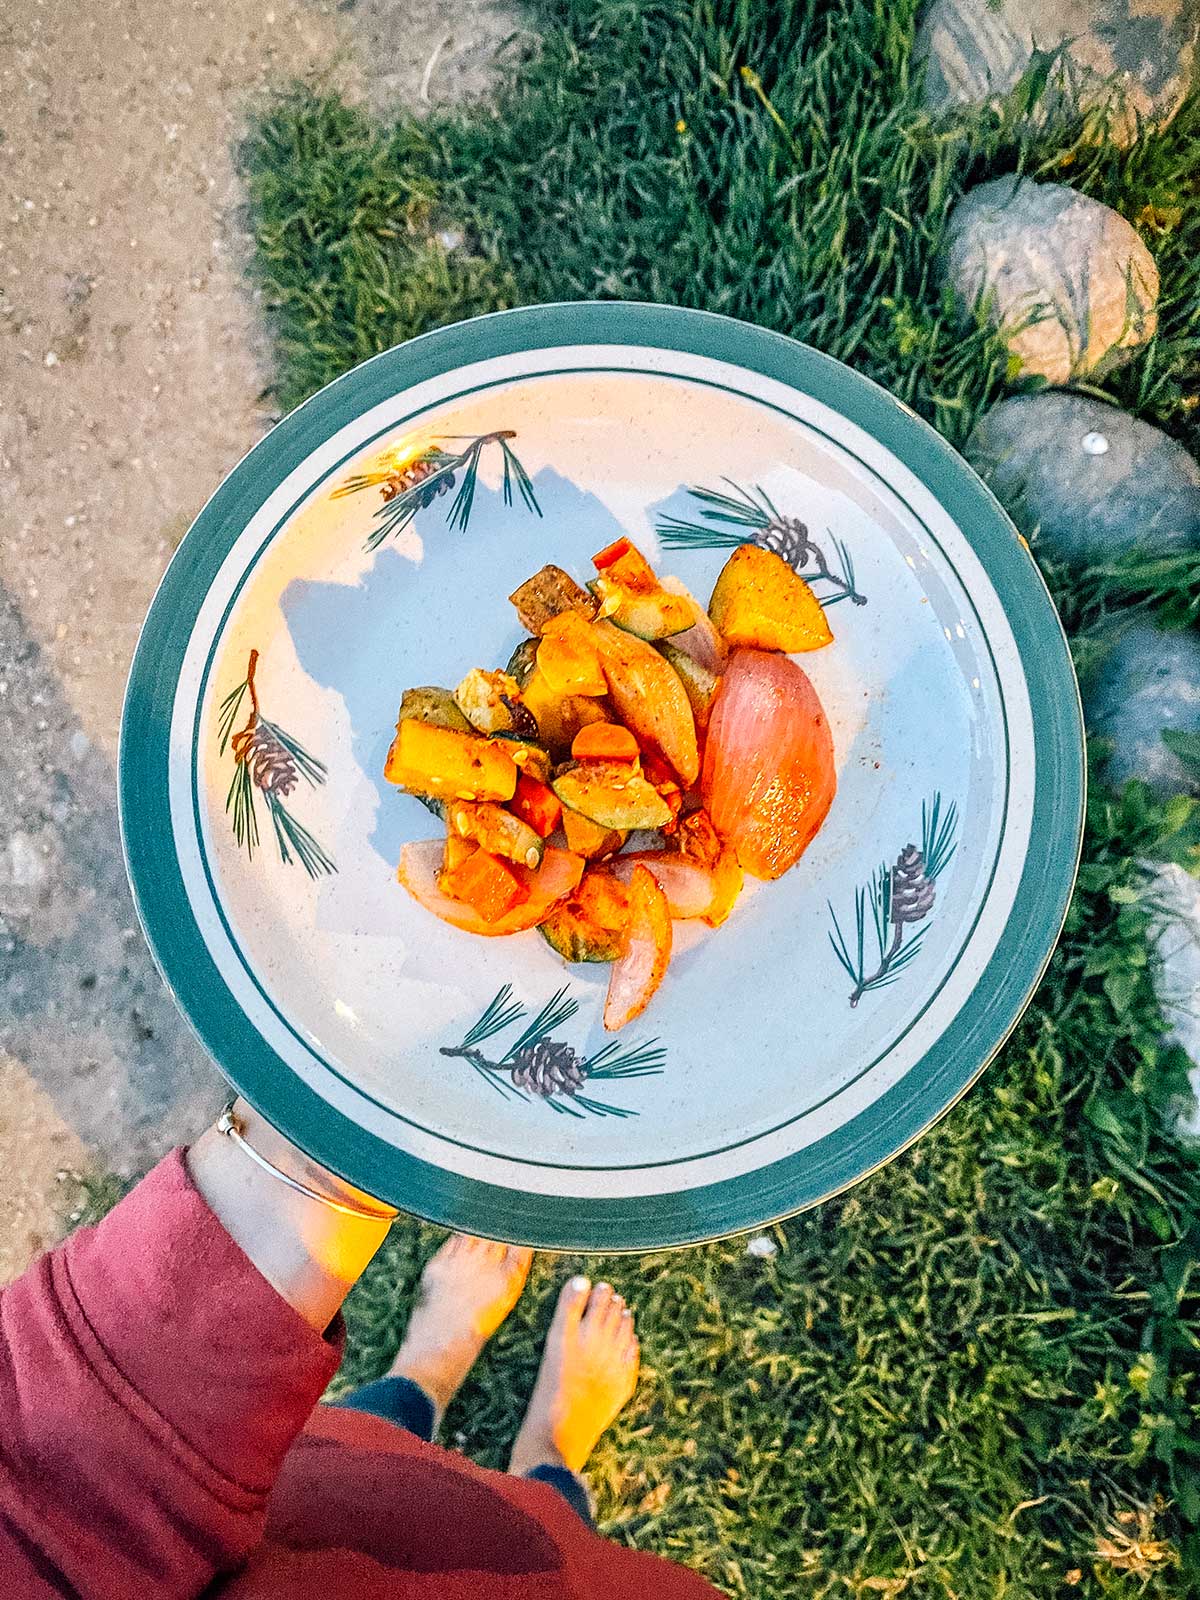 Holding a plate of campfire roasted veggies